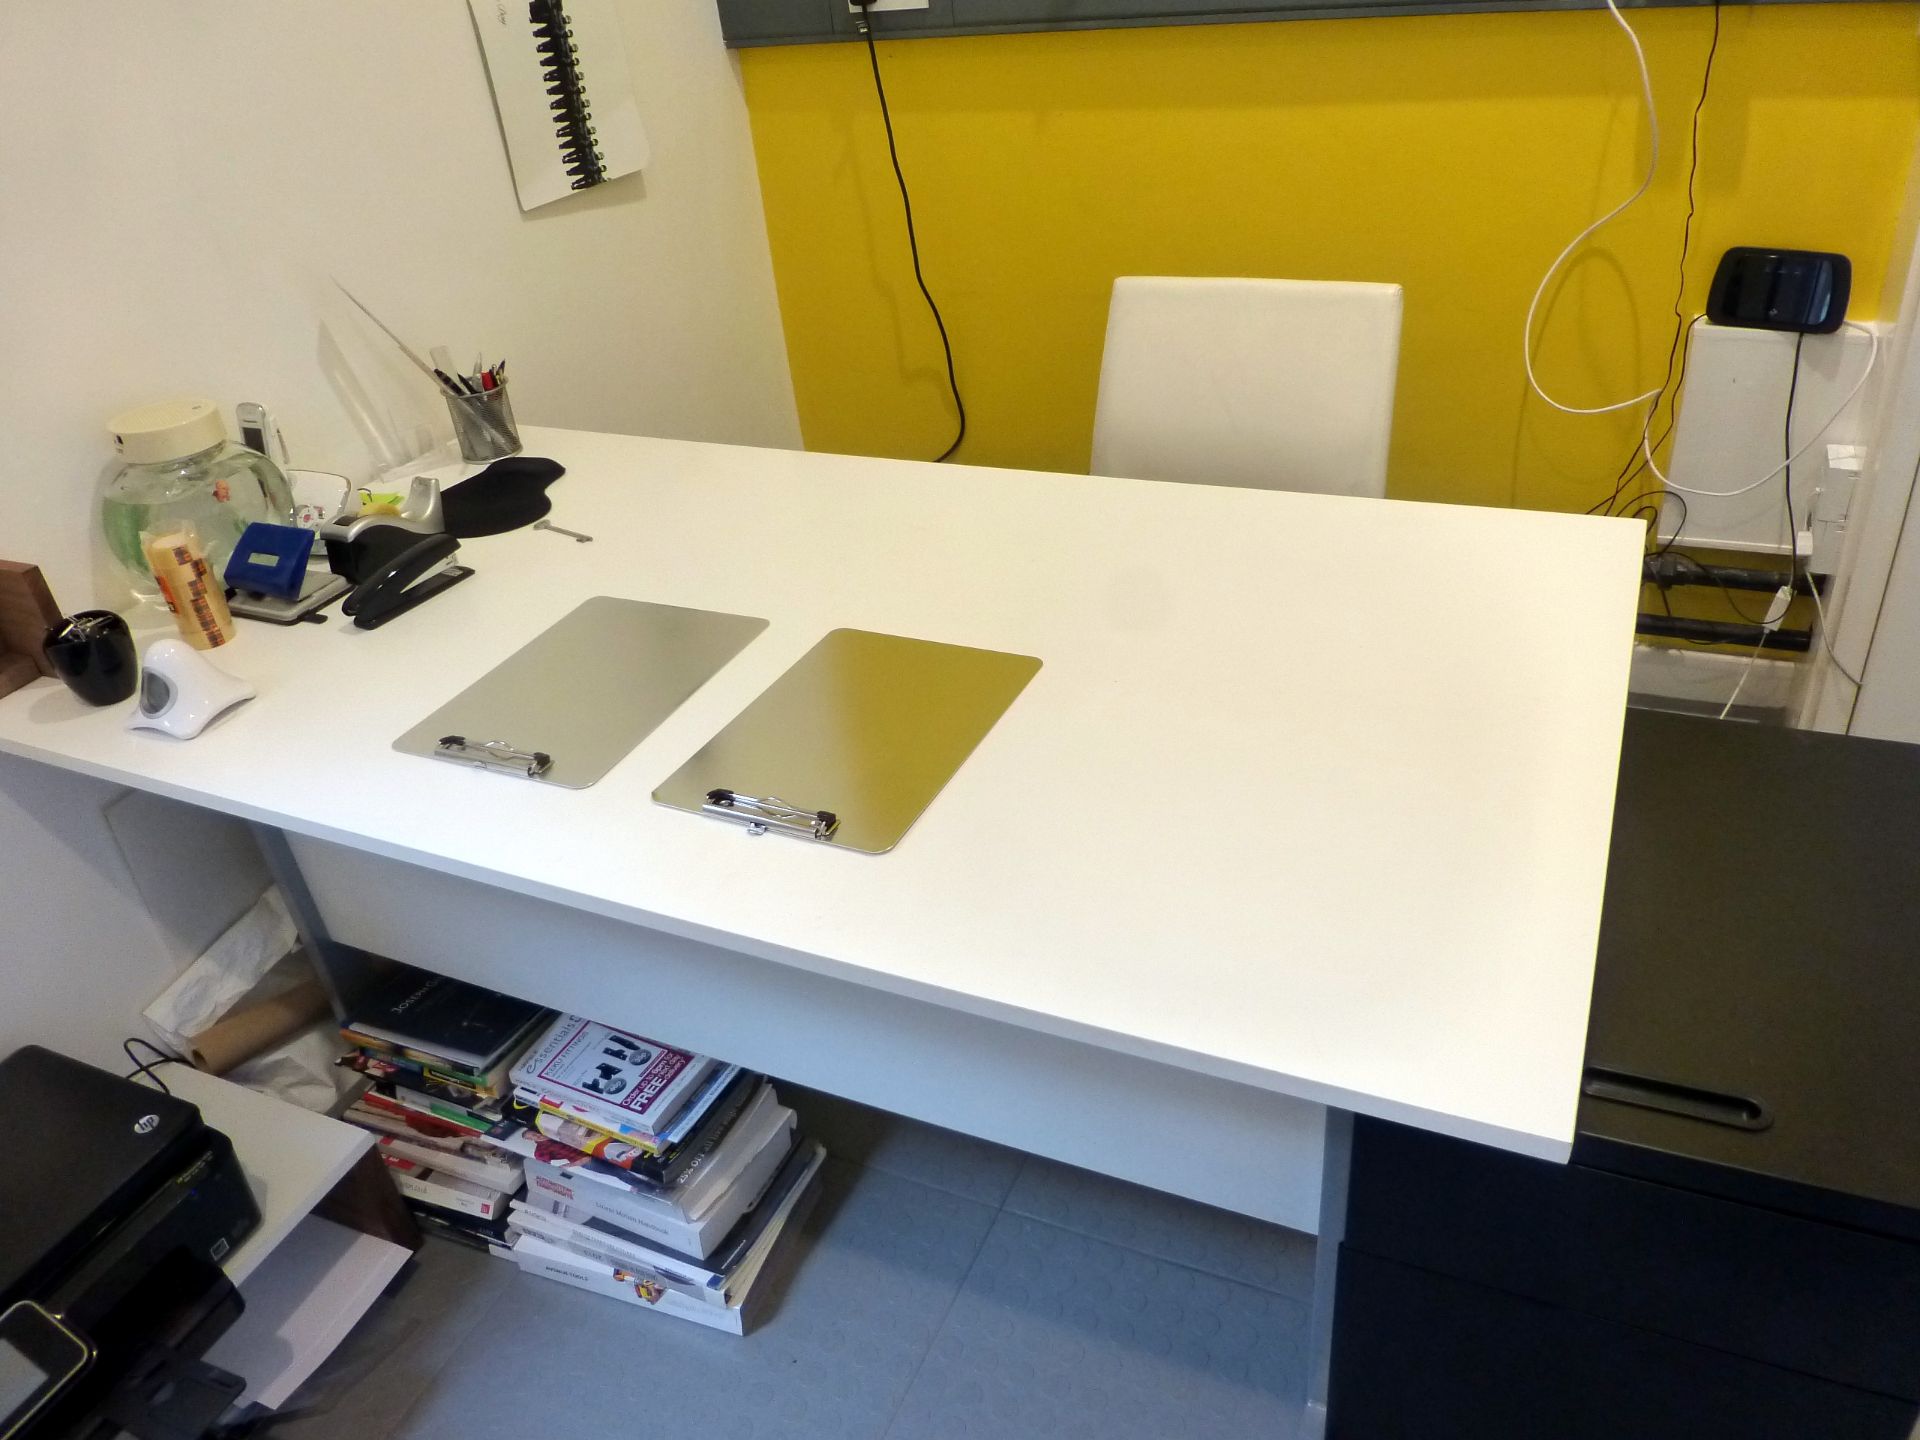 Contents of Office to include, HP Photosmart 6520 Multi-Function Centre, White Melamine Desk with